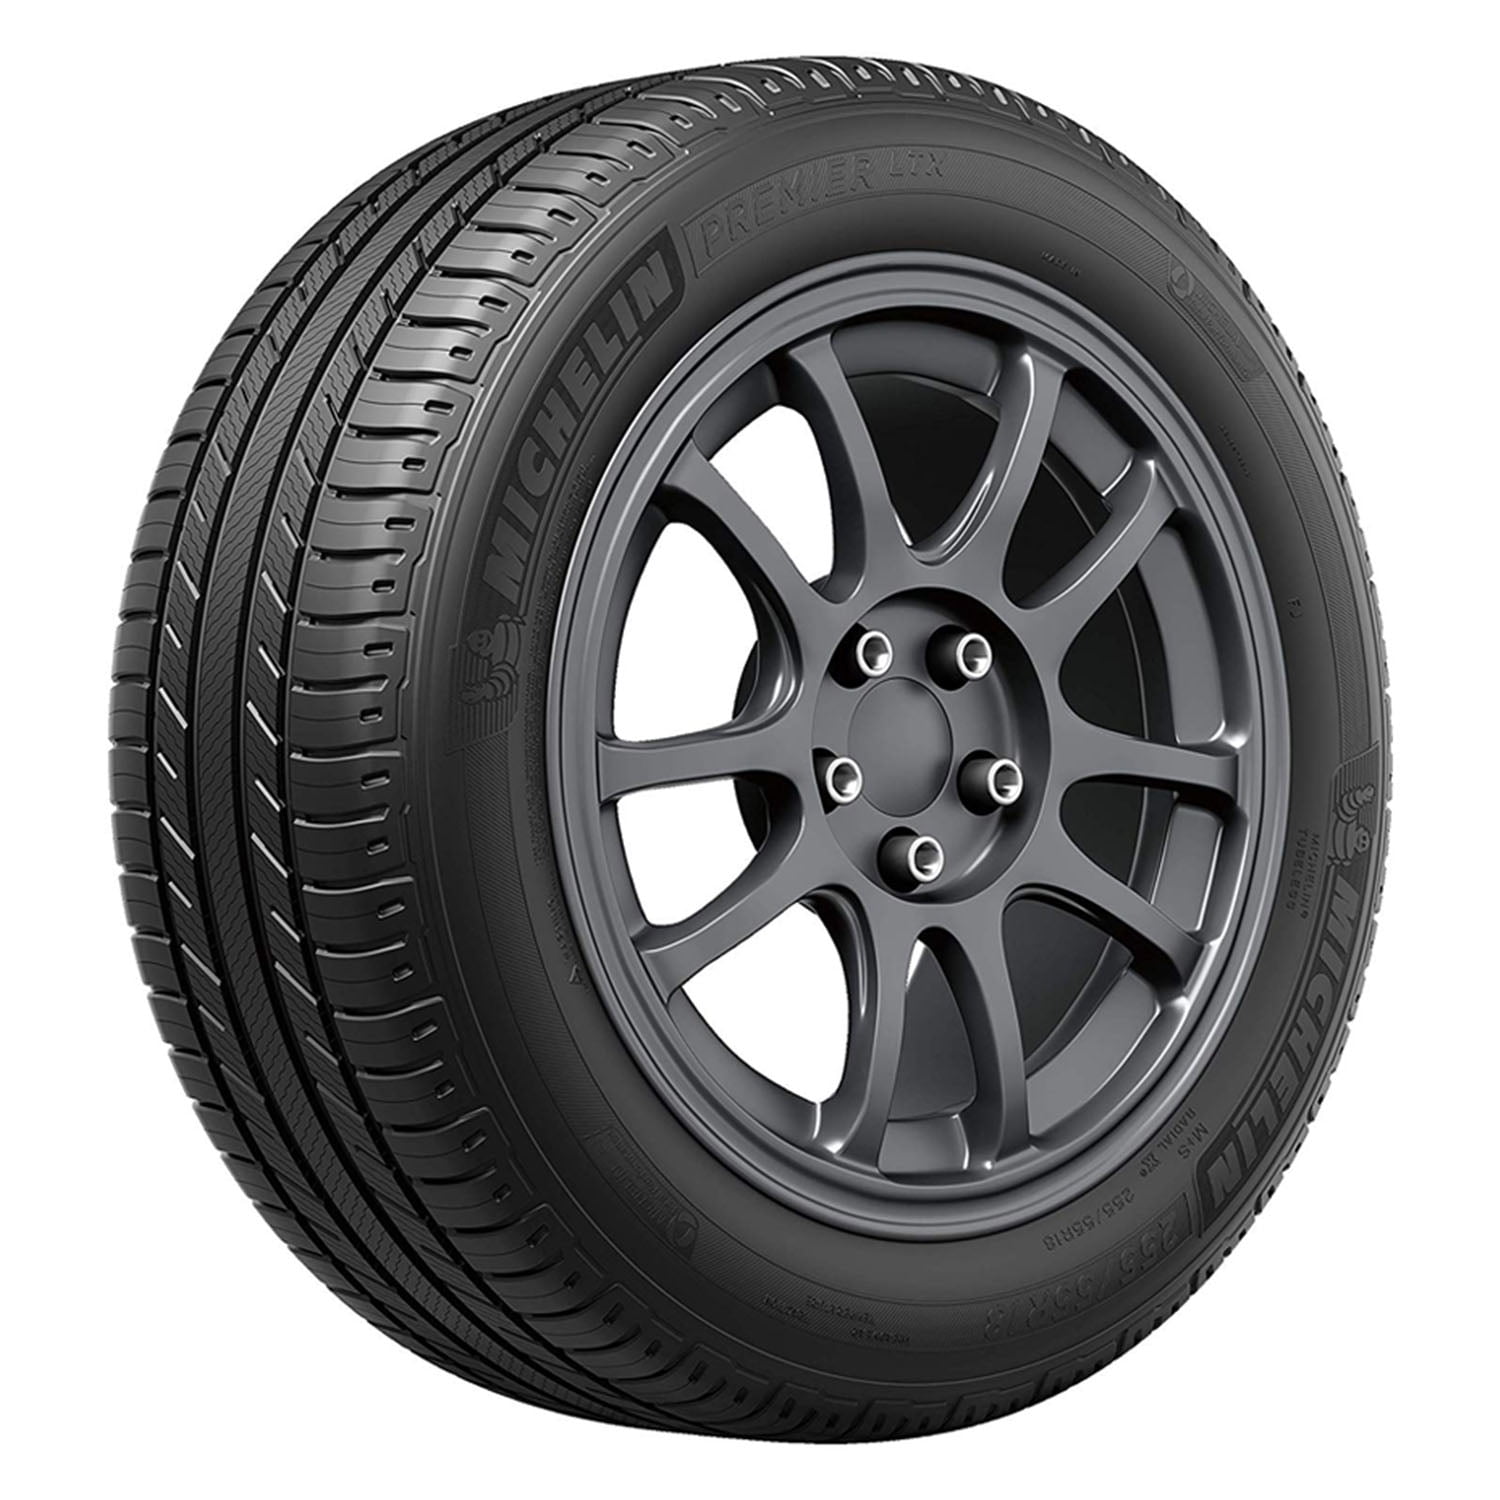 MICHELIN Premier A/S All-Season Radial Car Tire for Luxury Performance and Passenger Cars; 245/50R17 99V 